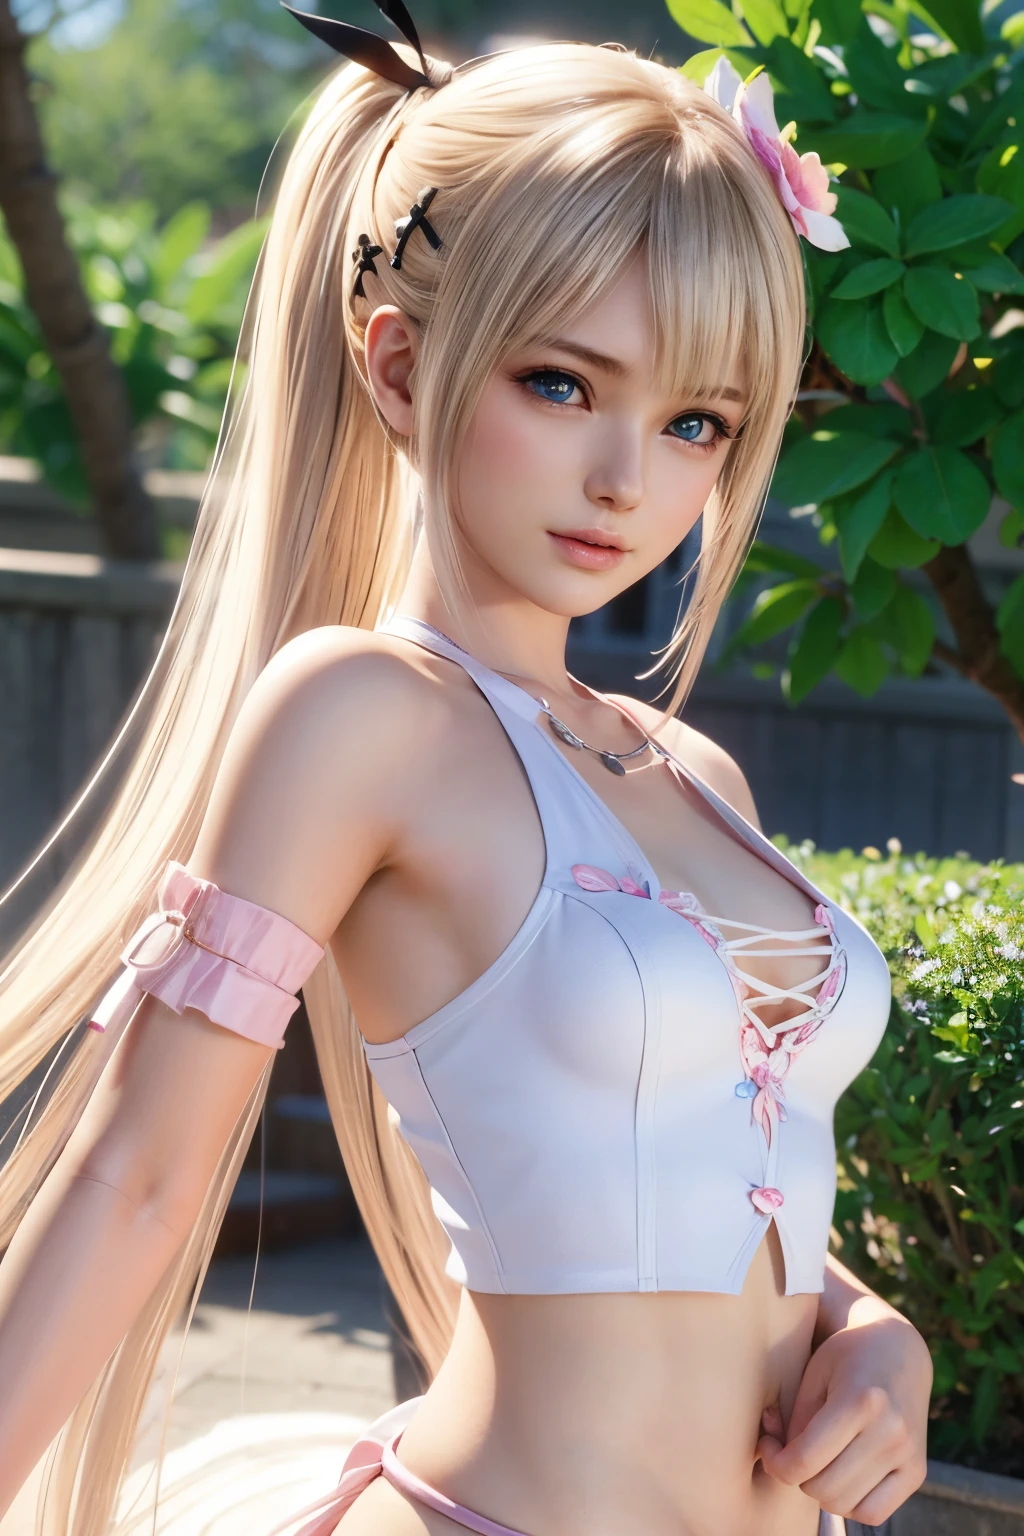 Marie rose, Anime girl with pink hair and flowers in her hair, artwork in the style of guweiz, photorealistic anime girl render, photorealistic anime, hyper realistic anime, anime. soft lighting, soft portrait shot 8 k, realistic anime art style, 3 d anime realistic, 8k art germ bokeh, anime realism style, kawaii realistic portrait, beautiful anime portrait